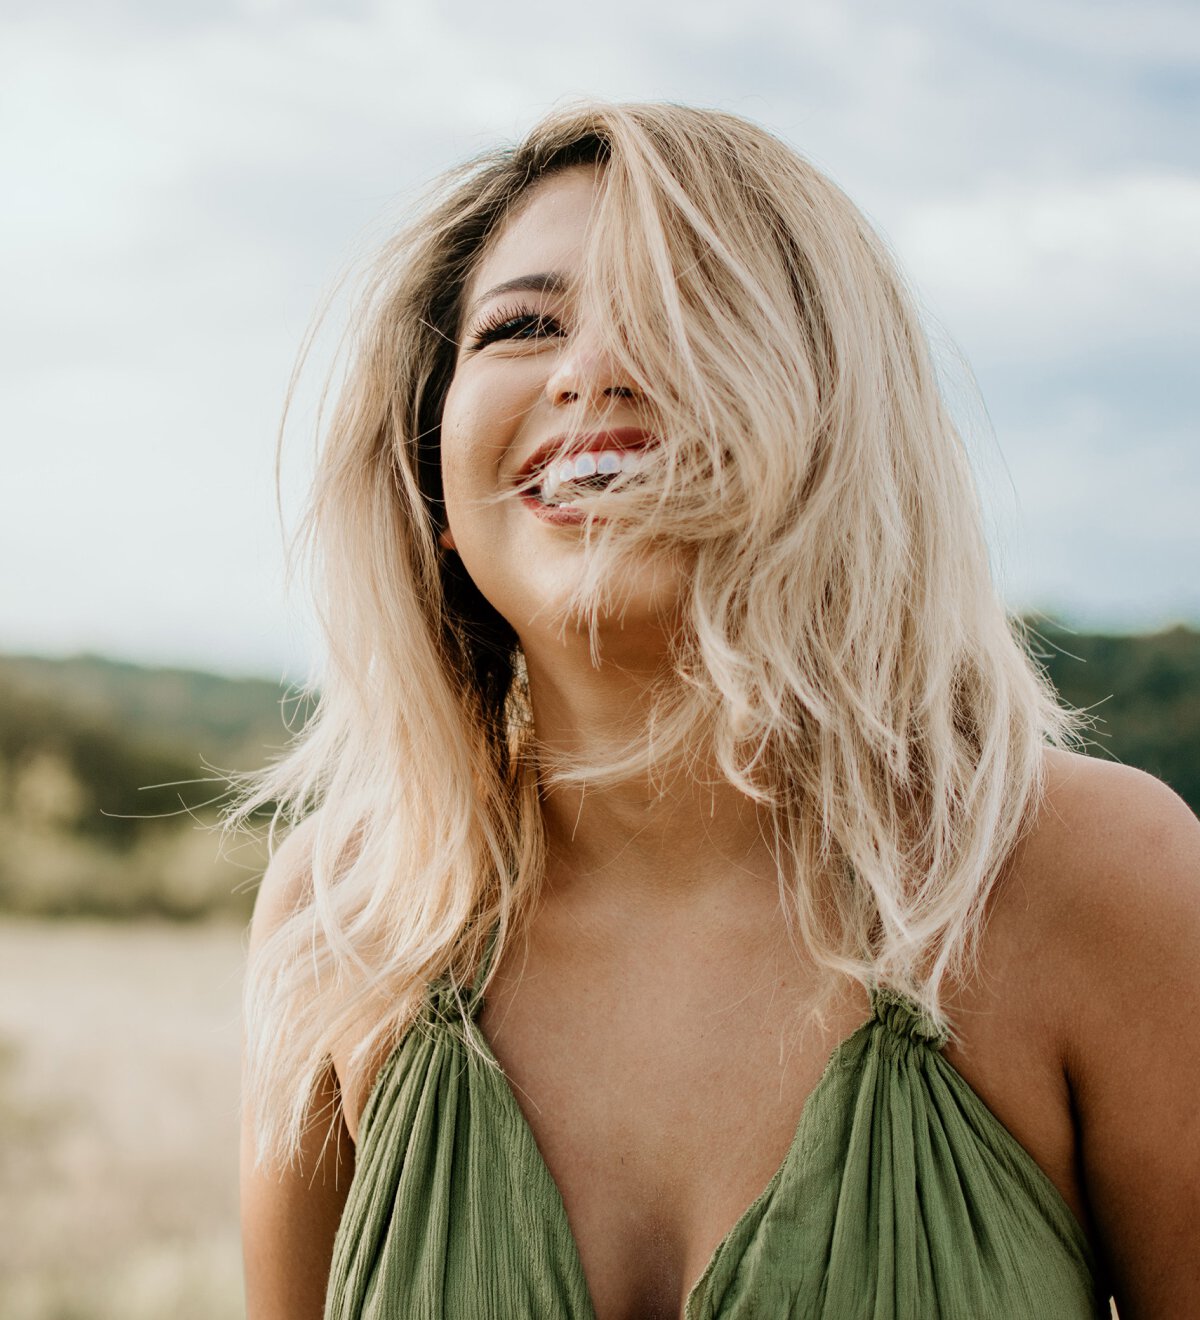 Blonde Haired Woman laughing on beach